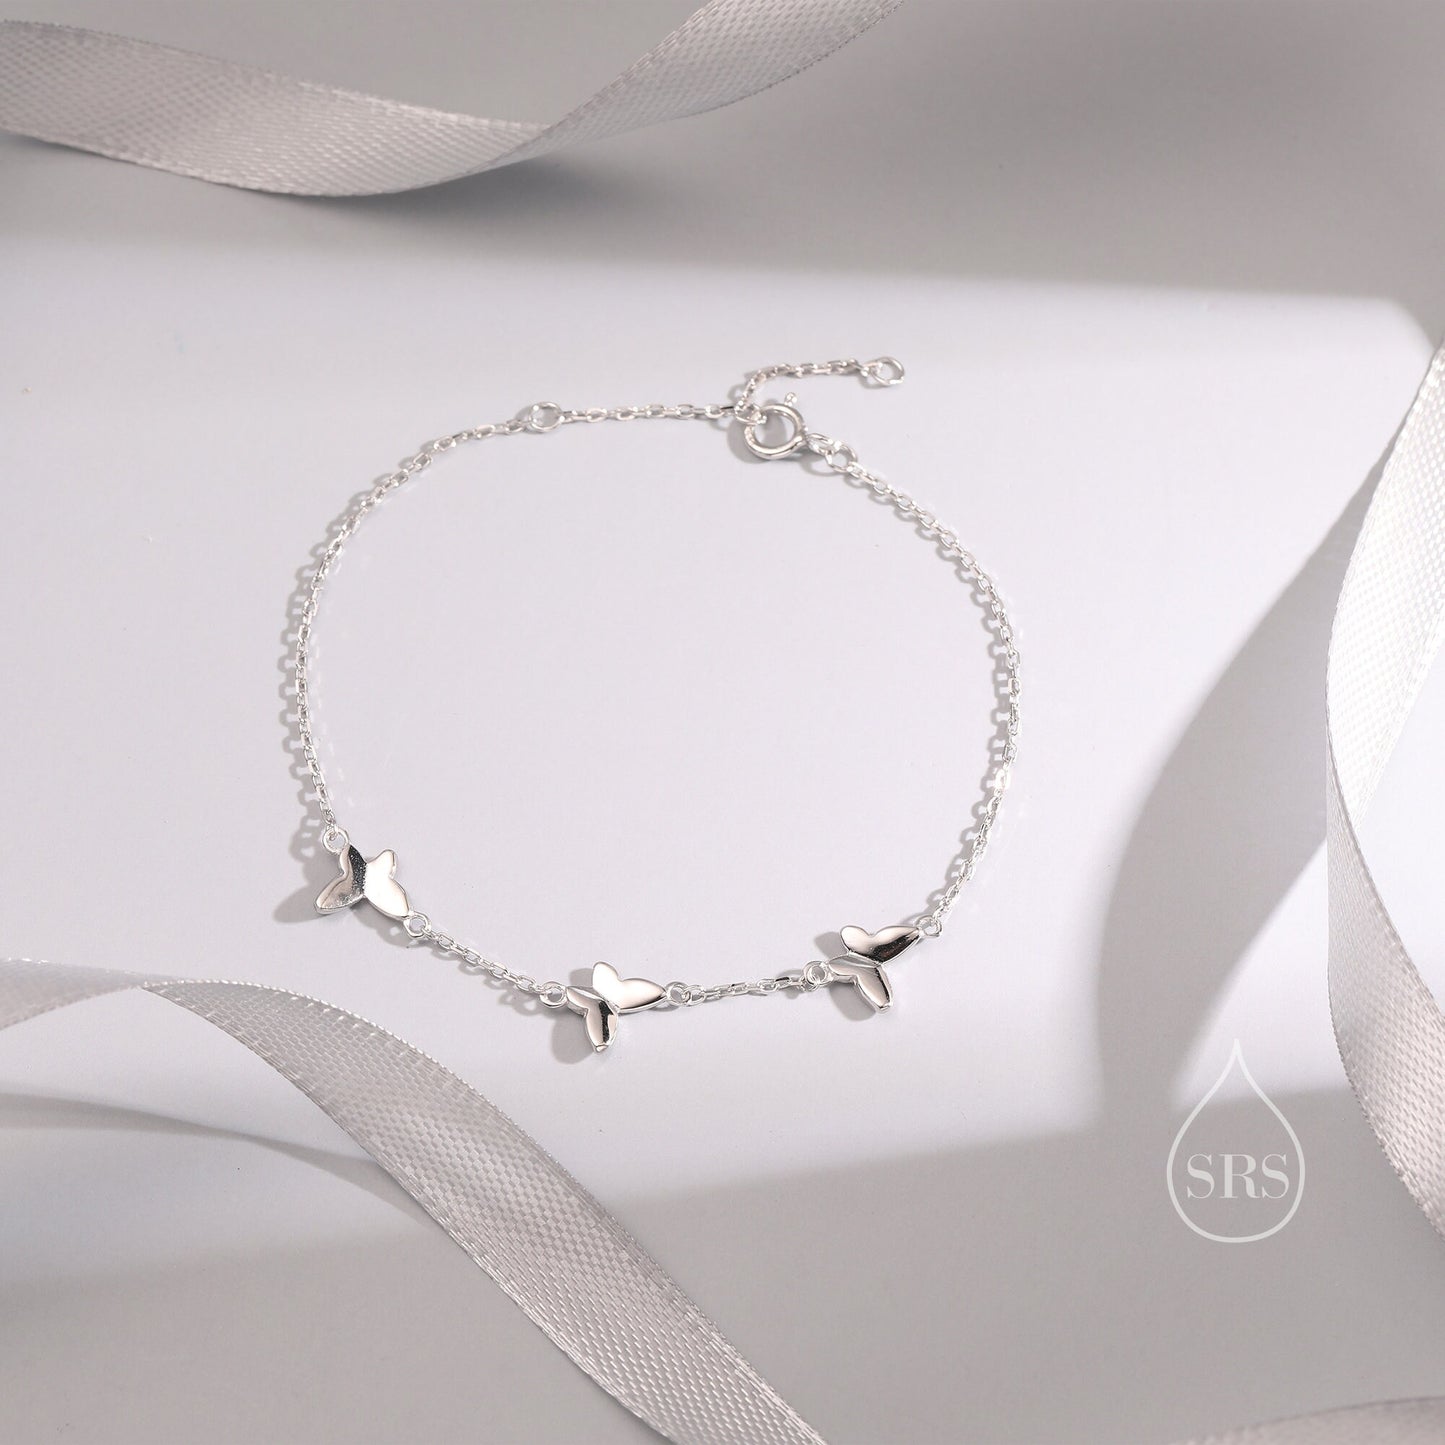 Chasing Butterfly Floating Bracelet in Sterling Silver, Silver or Gold or Rose gold, Satellite Crystal Bracelet, Solid Silver Bracelet